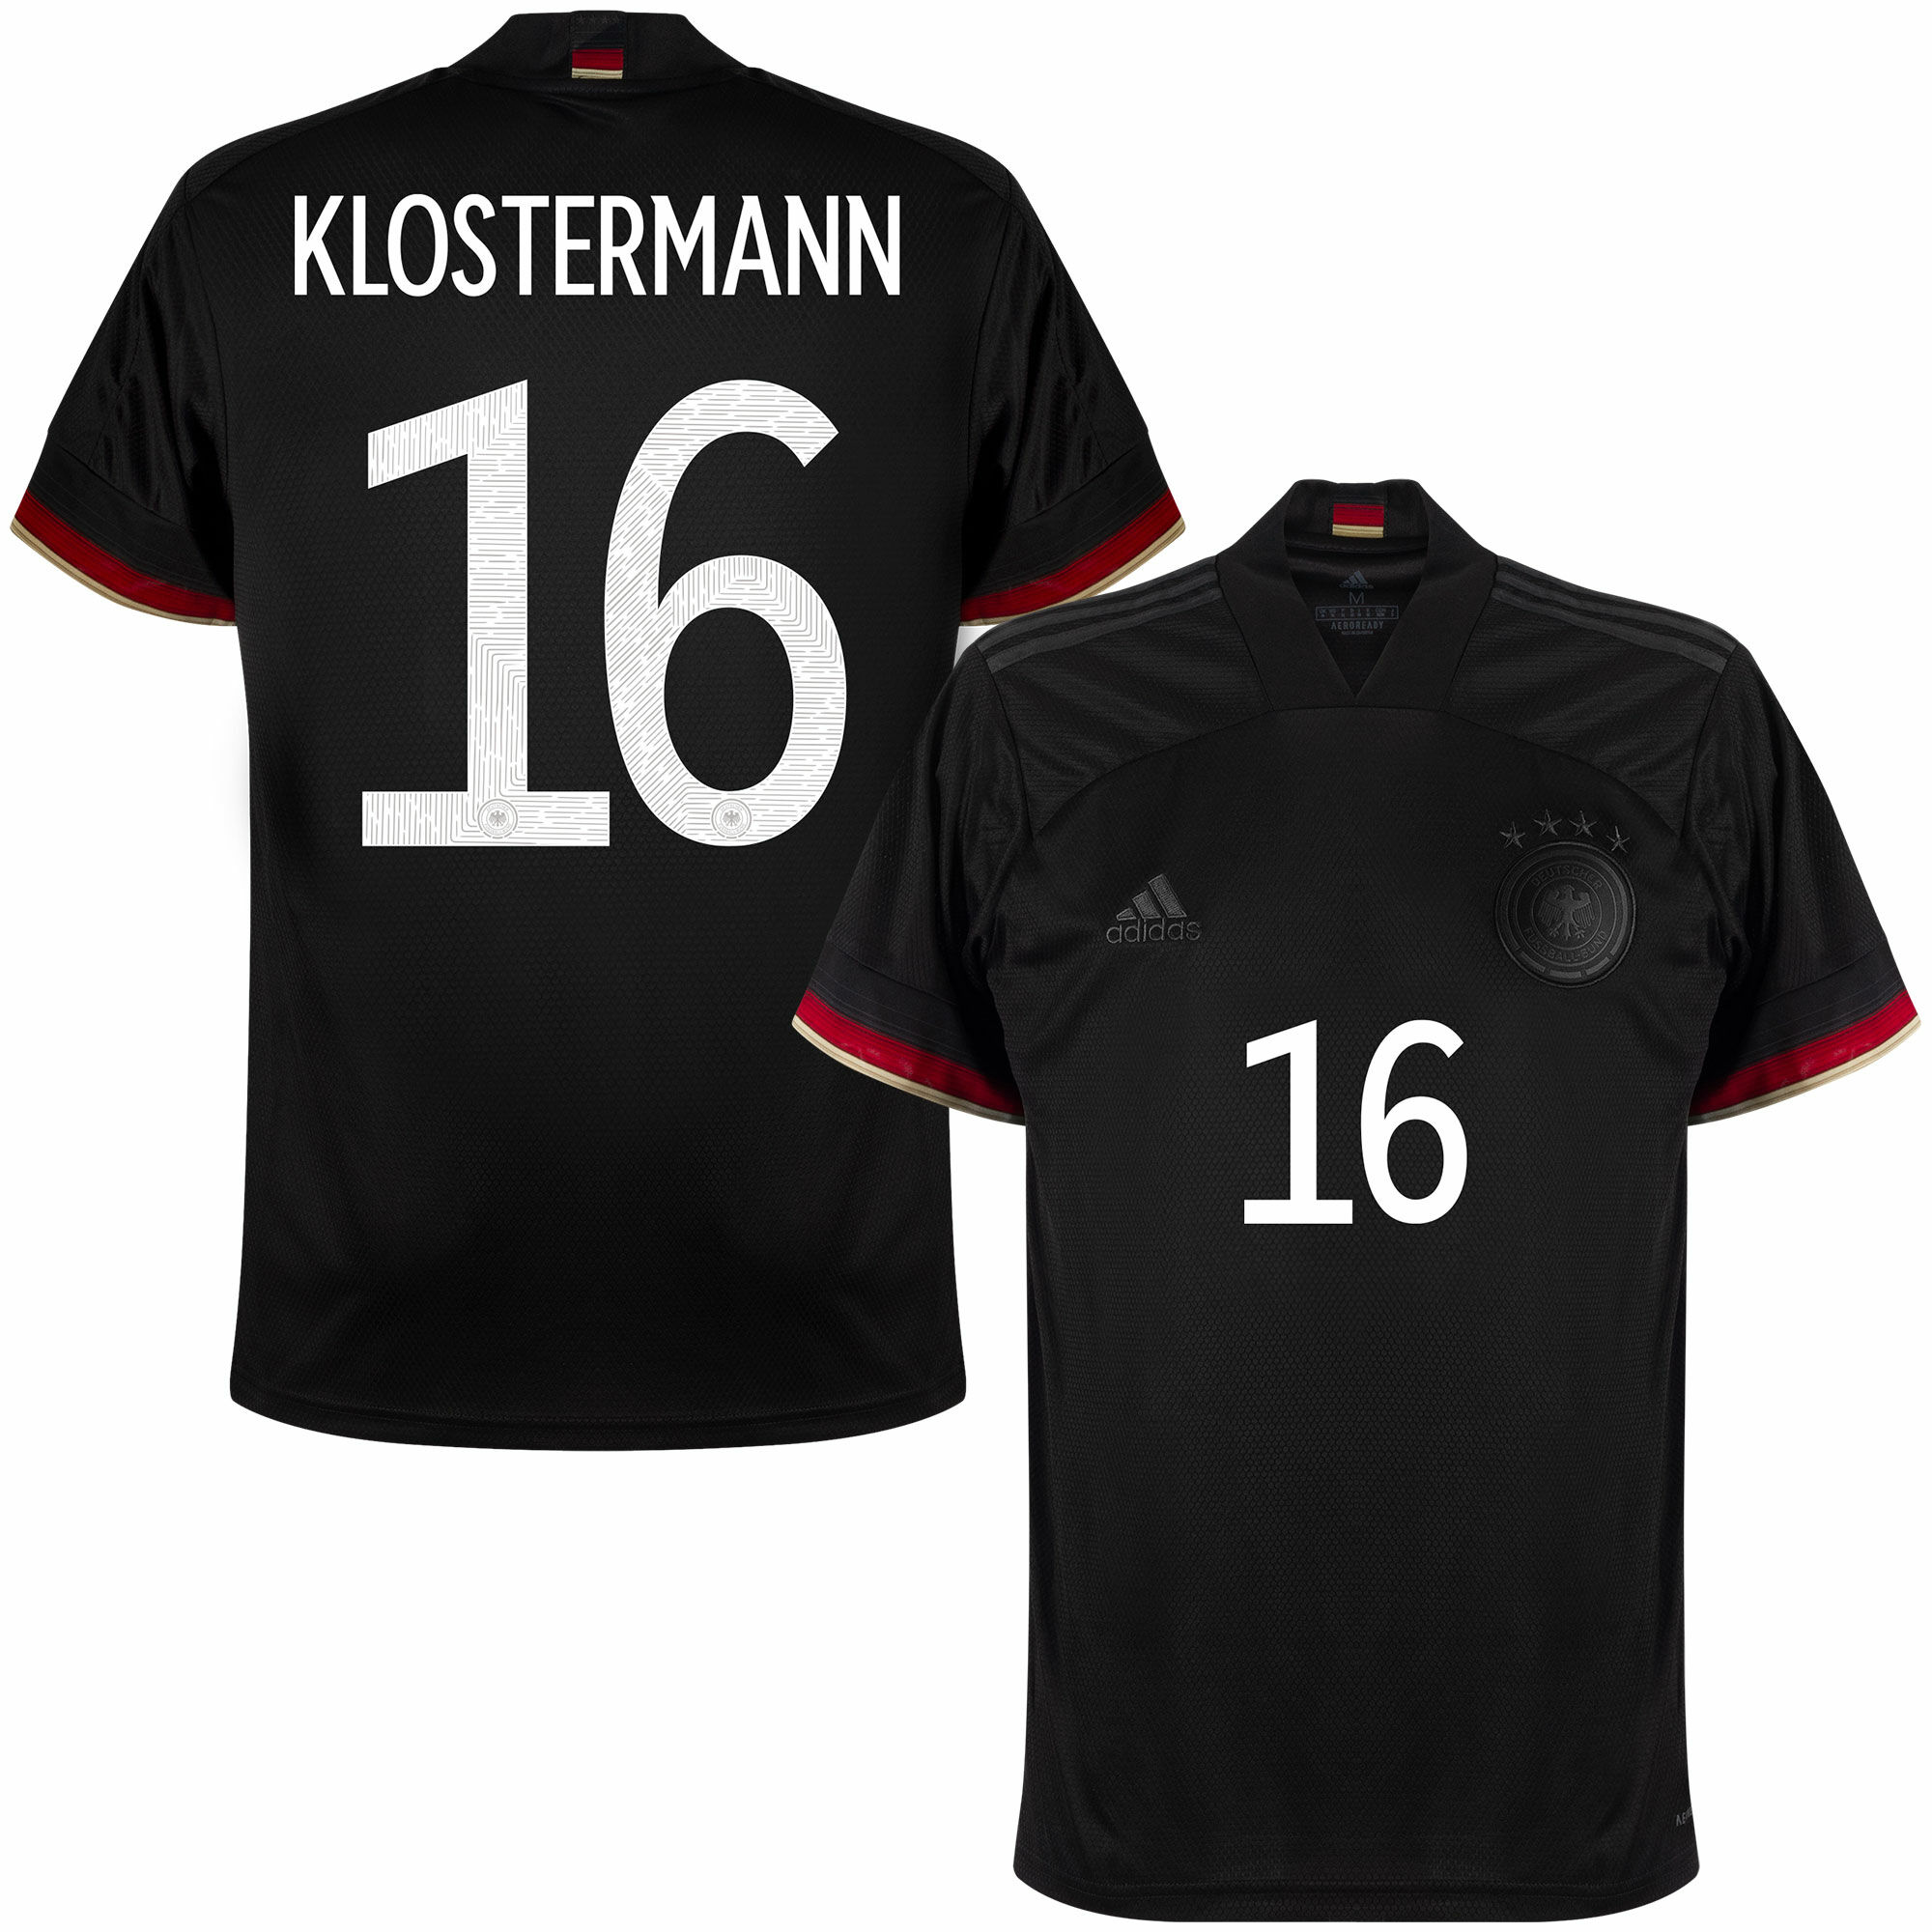 Germany No13 Klostermann White Home Soccer Country Jersey